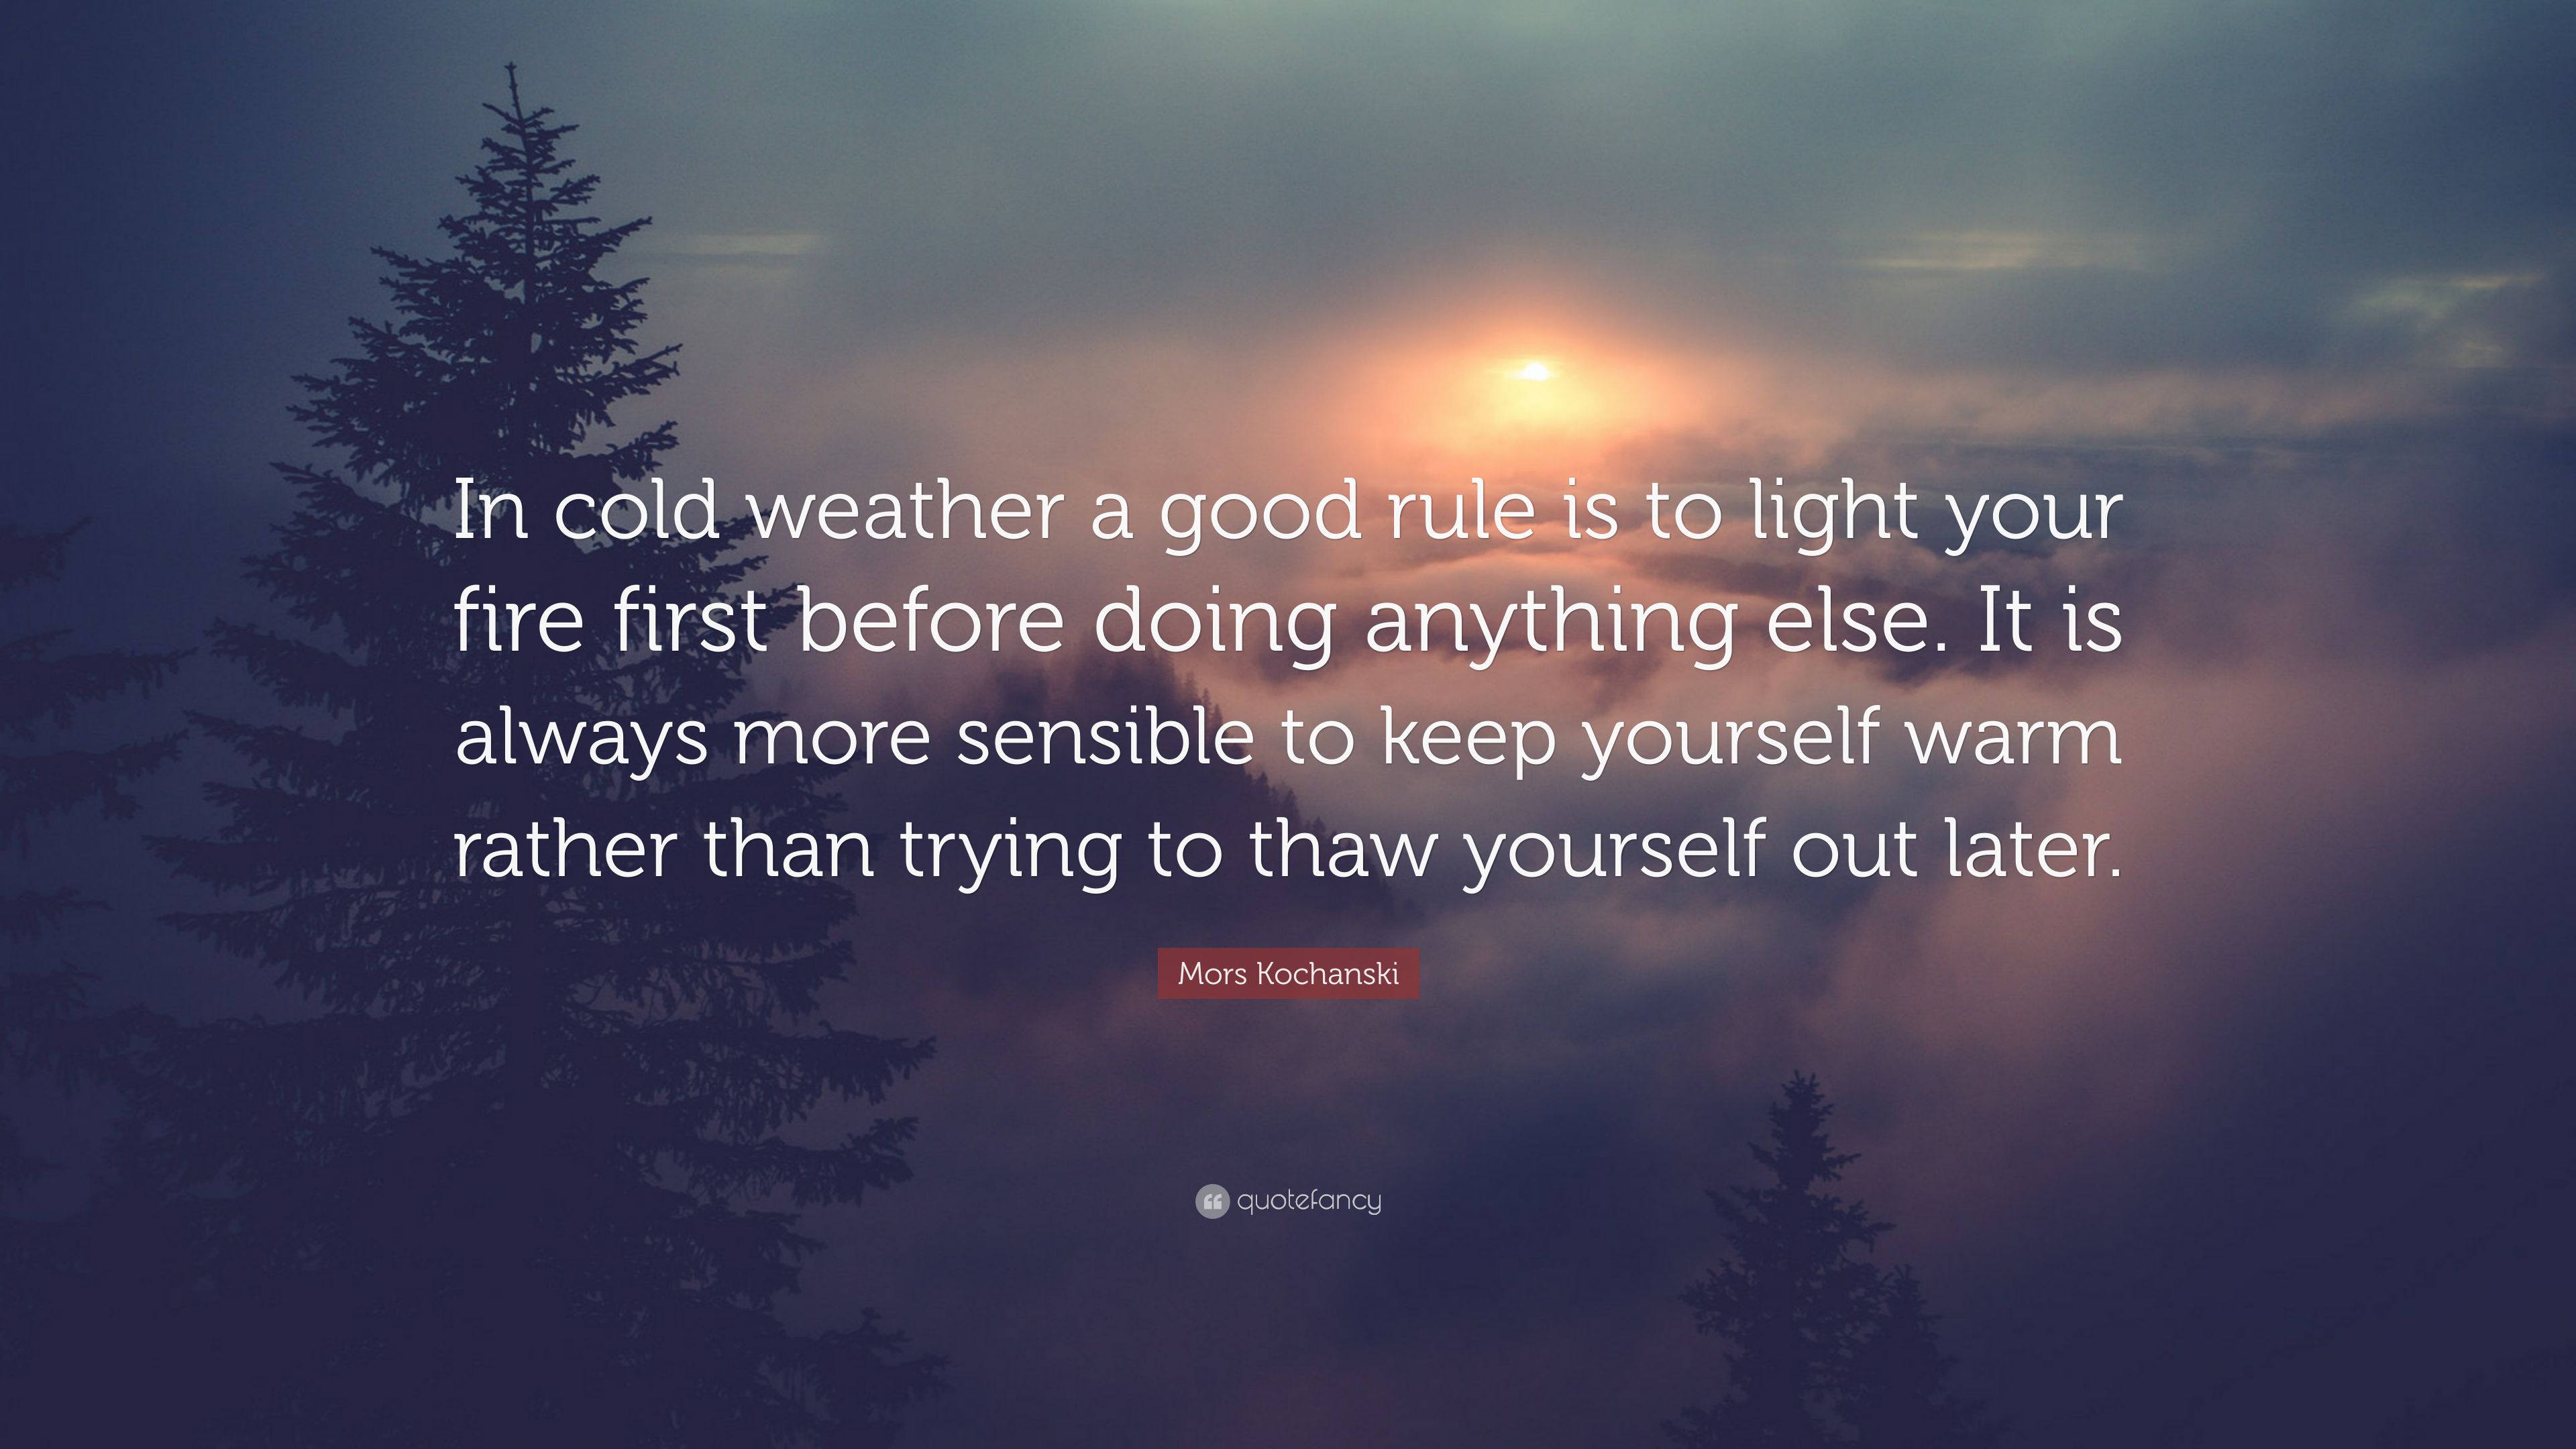 Mors Kochanski Quote: “In cold weather a good rule is to light